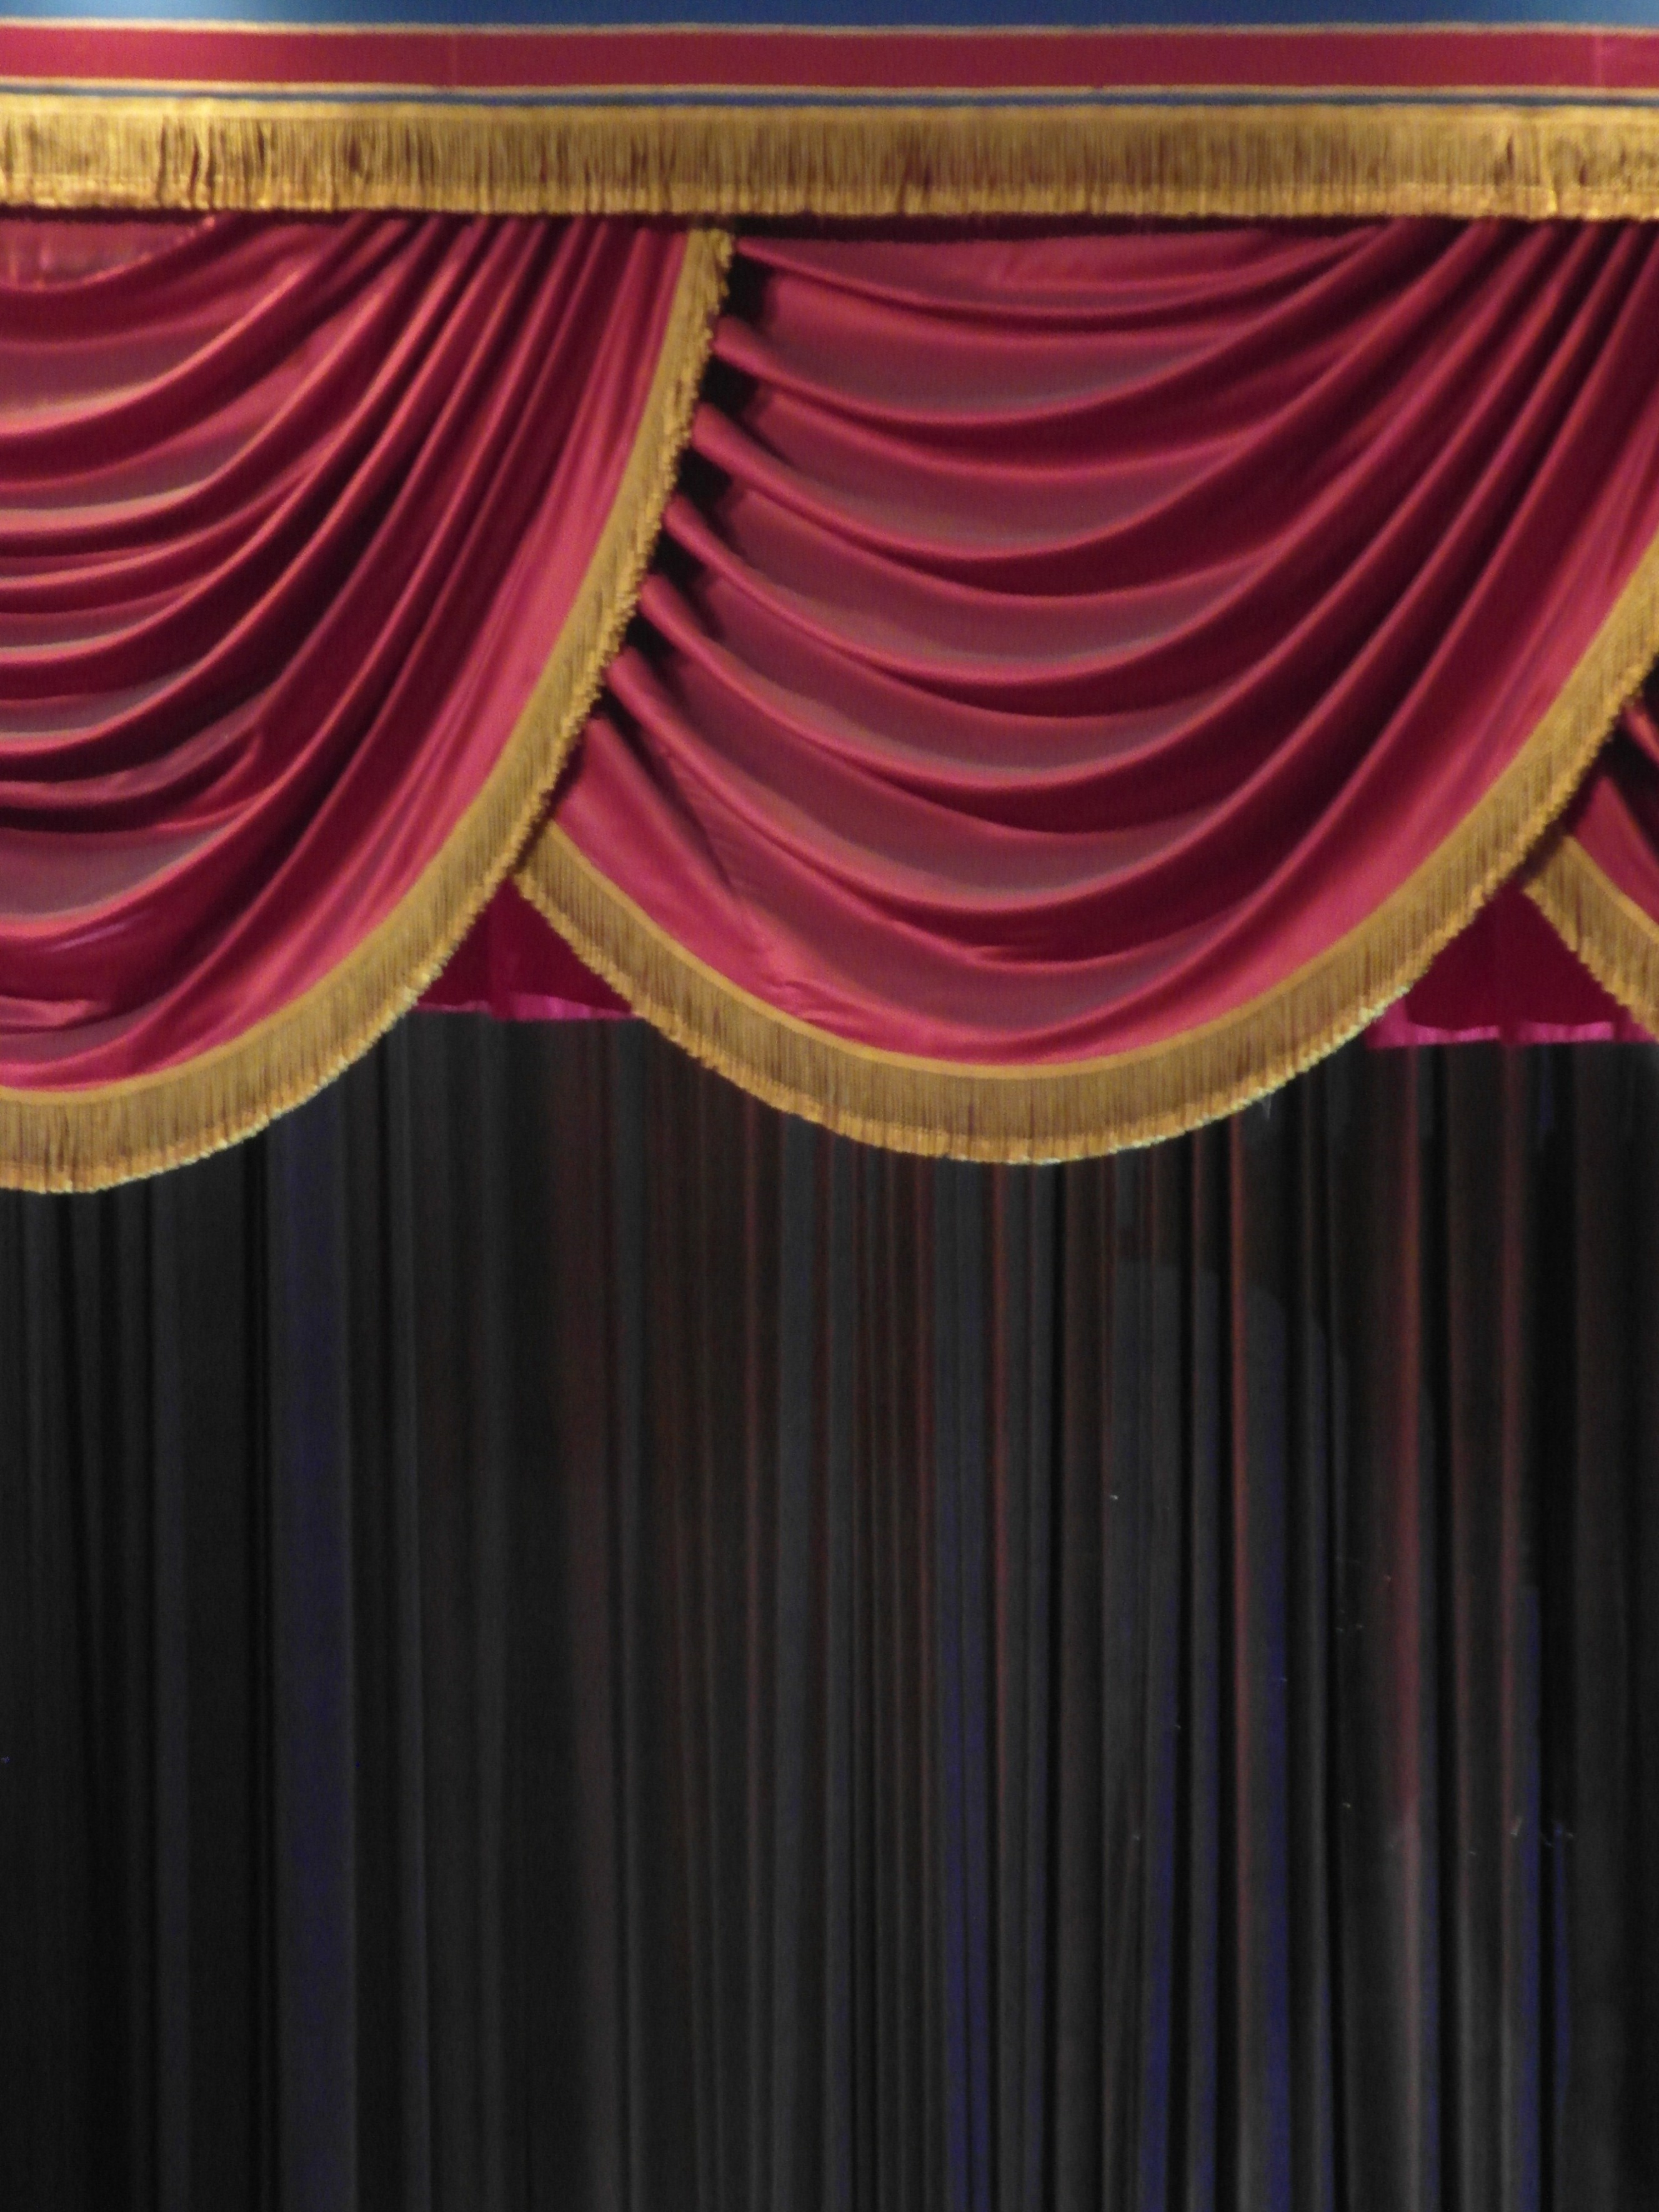 Velvet Stage Curtain, Act, Presentation, Hollywood, Movie, HQ Photo